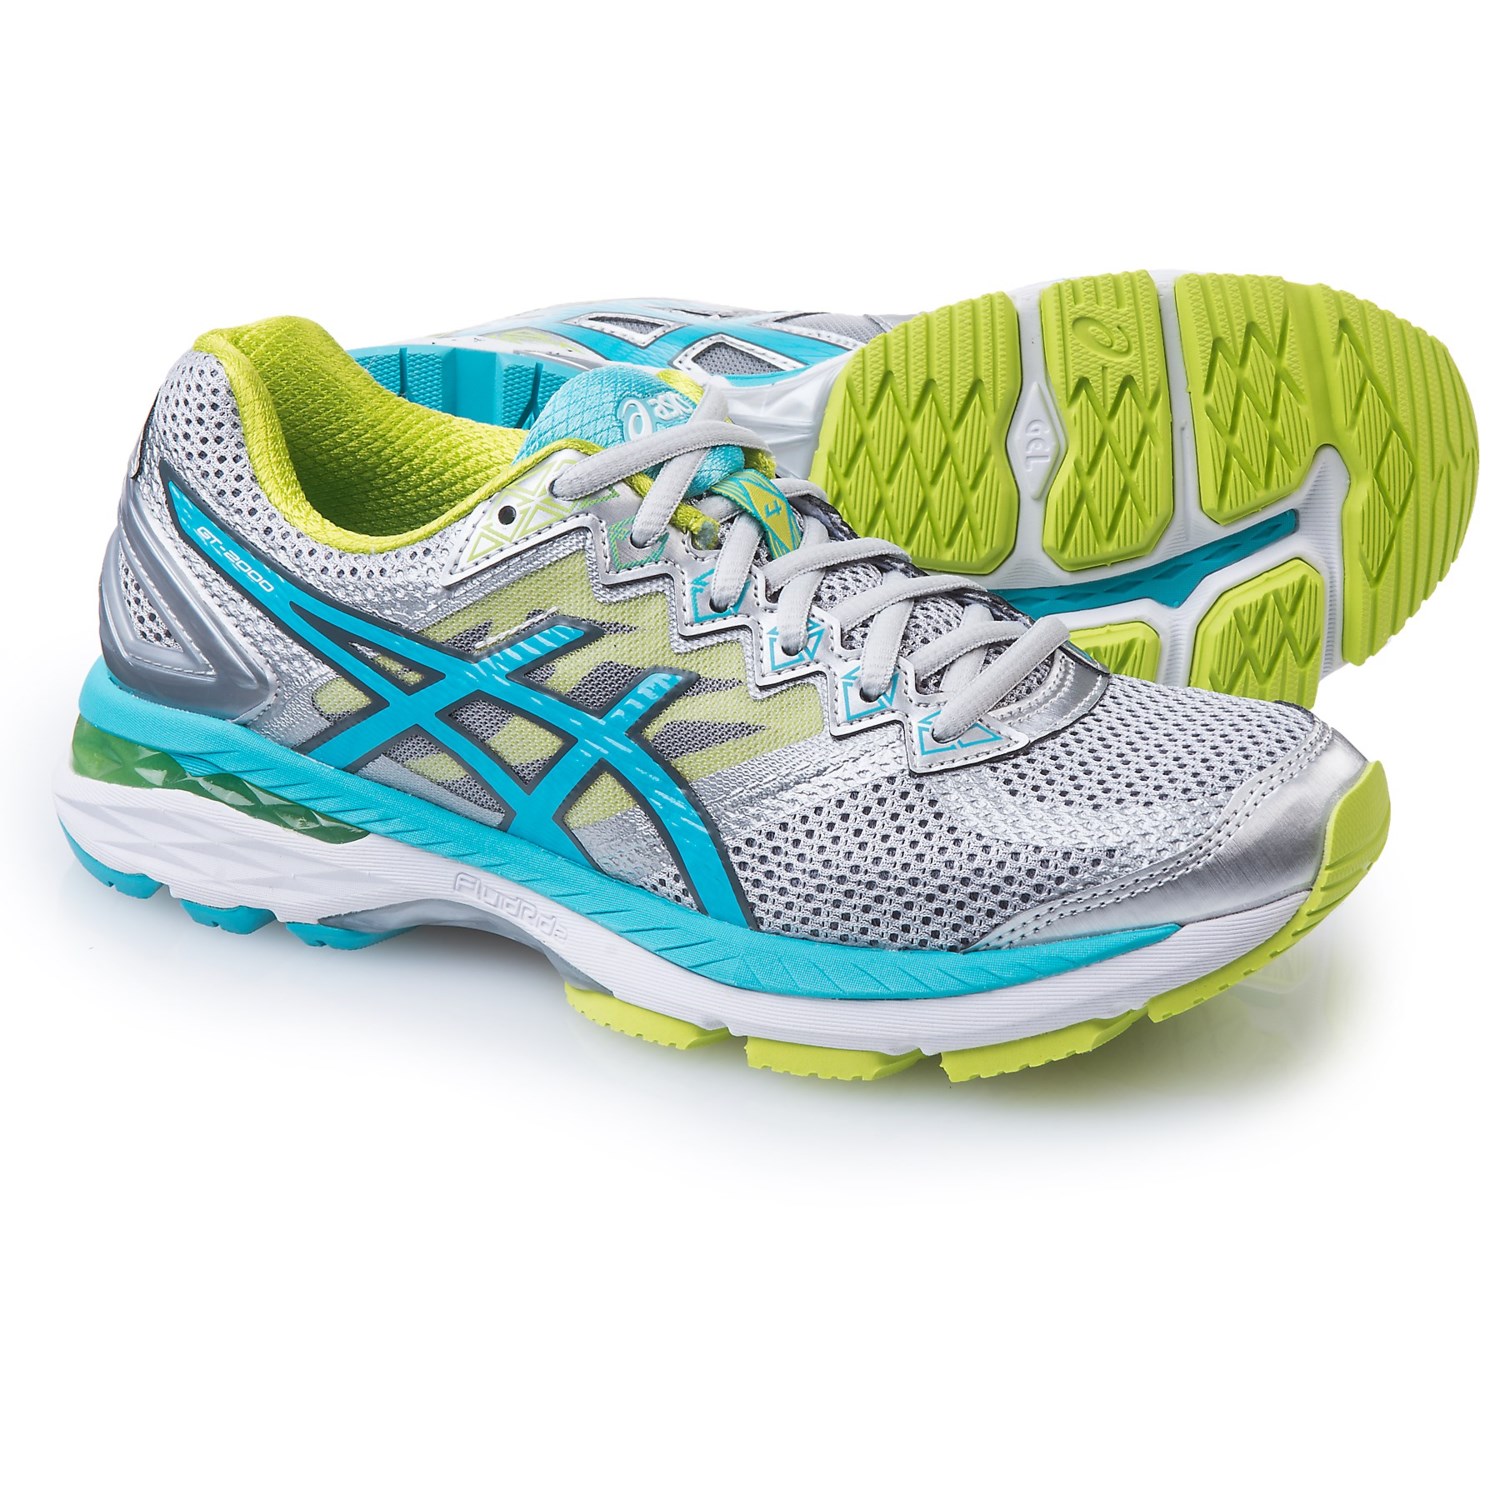 ASICS GT-2000 4 Running Shoes (For Women) - Save 50%